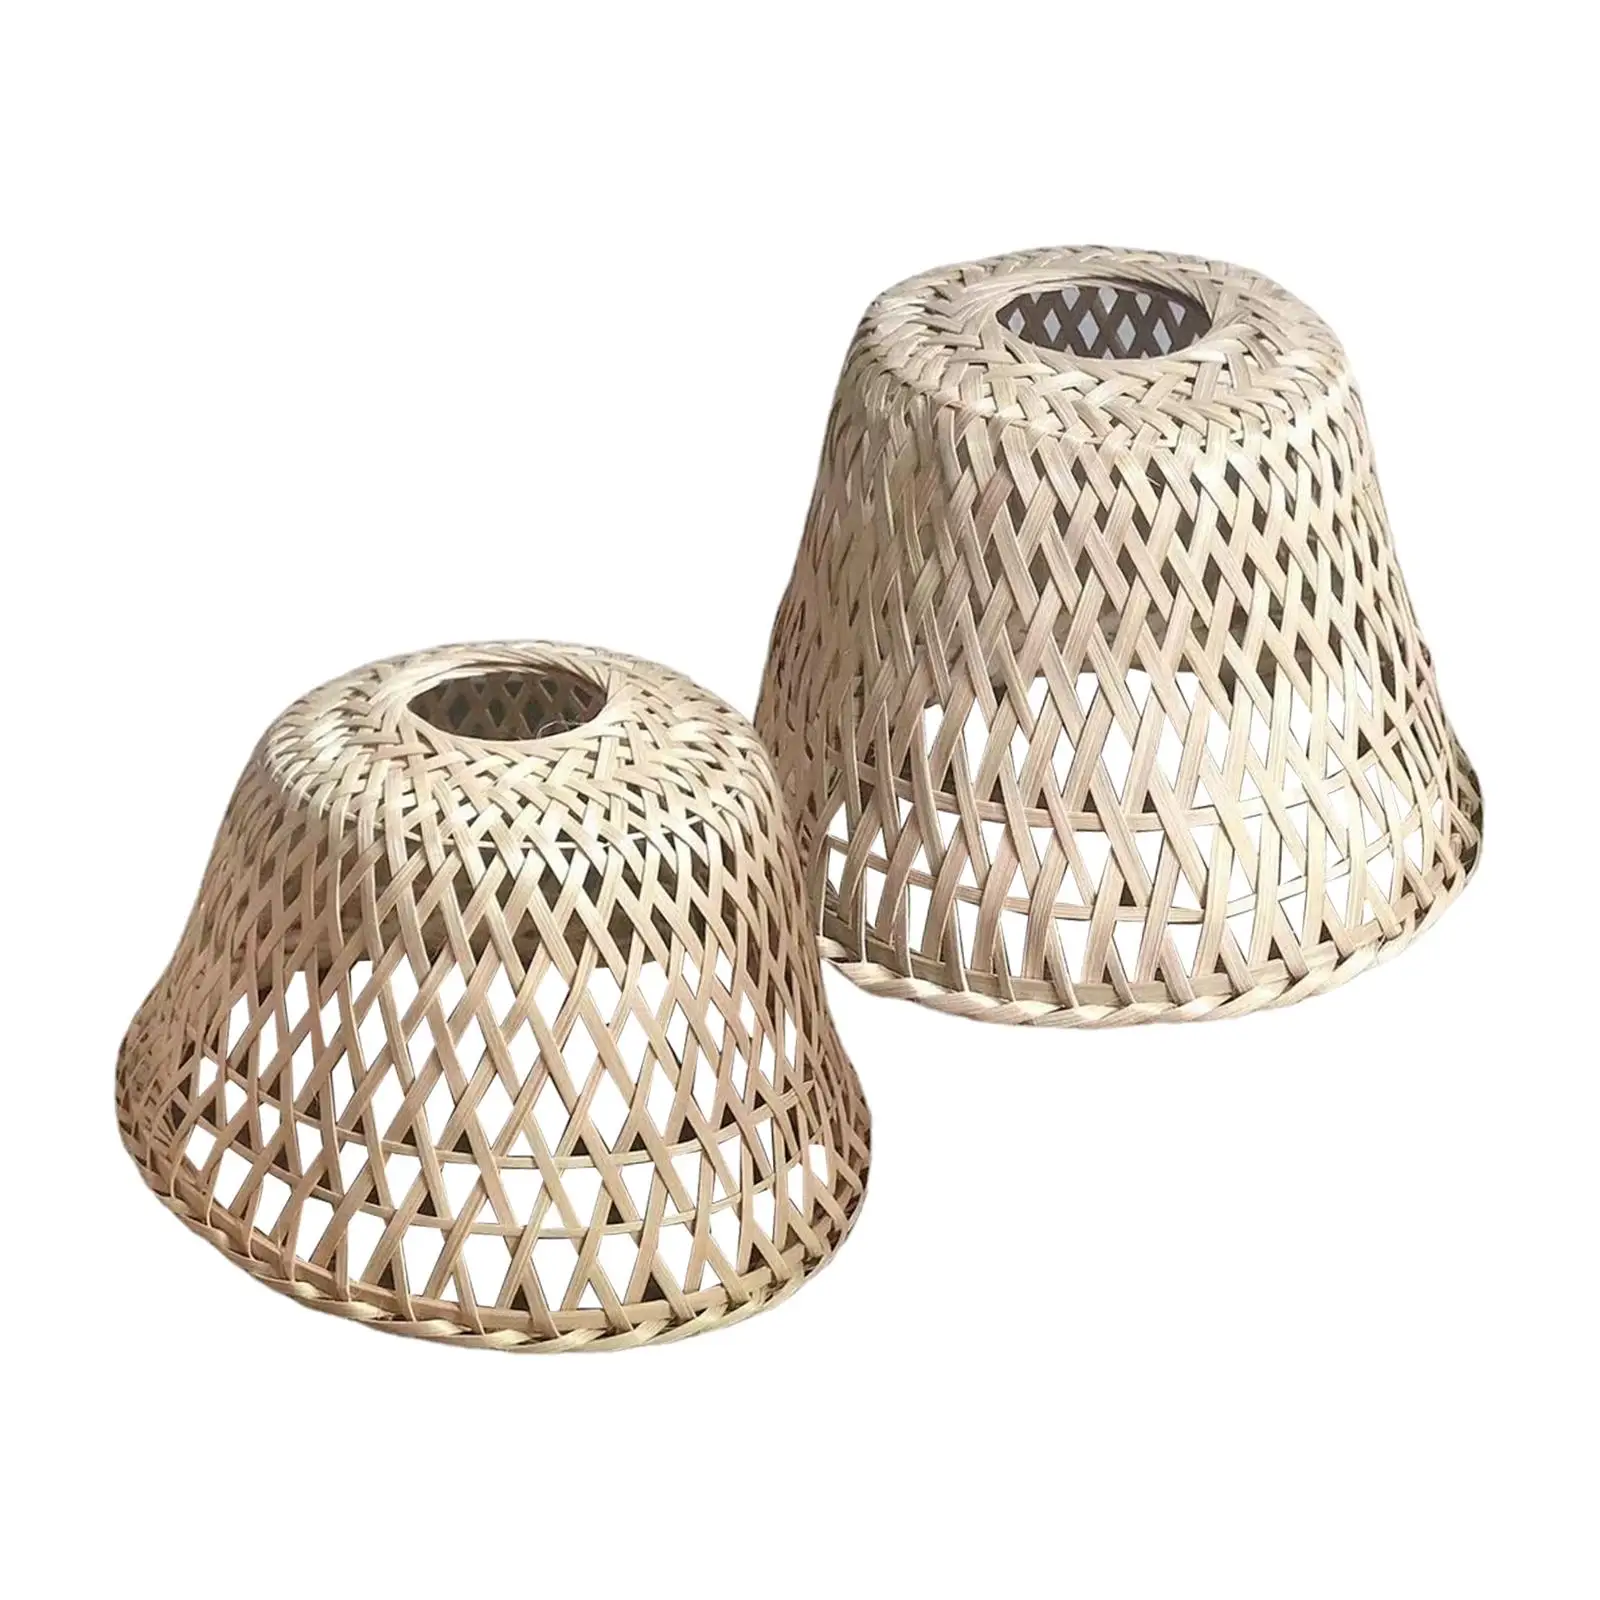 Retro Style Bamboo Weave Hanging Lamp Shade Premium Material for Dining Room